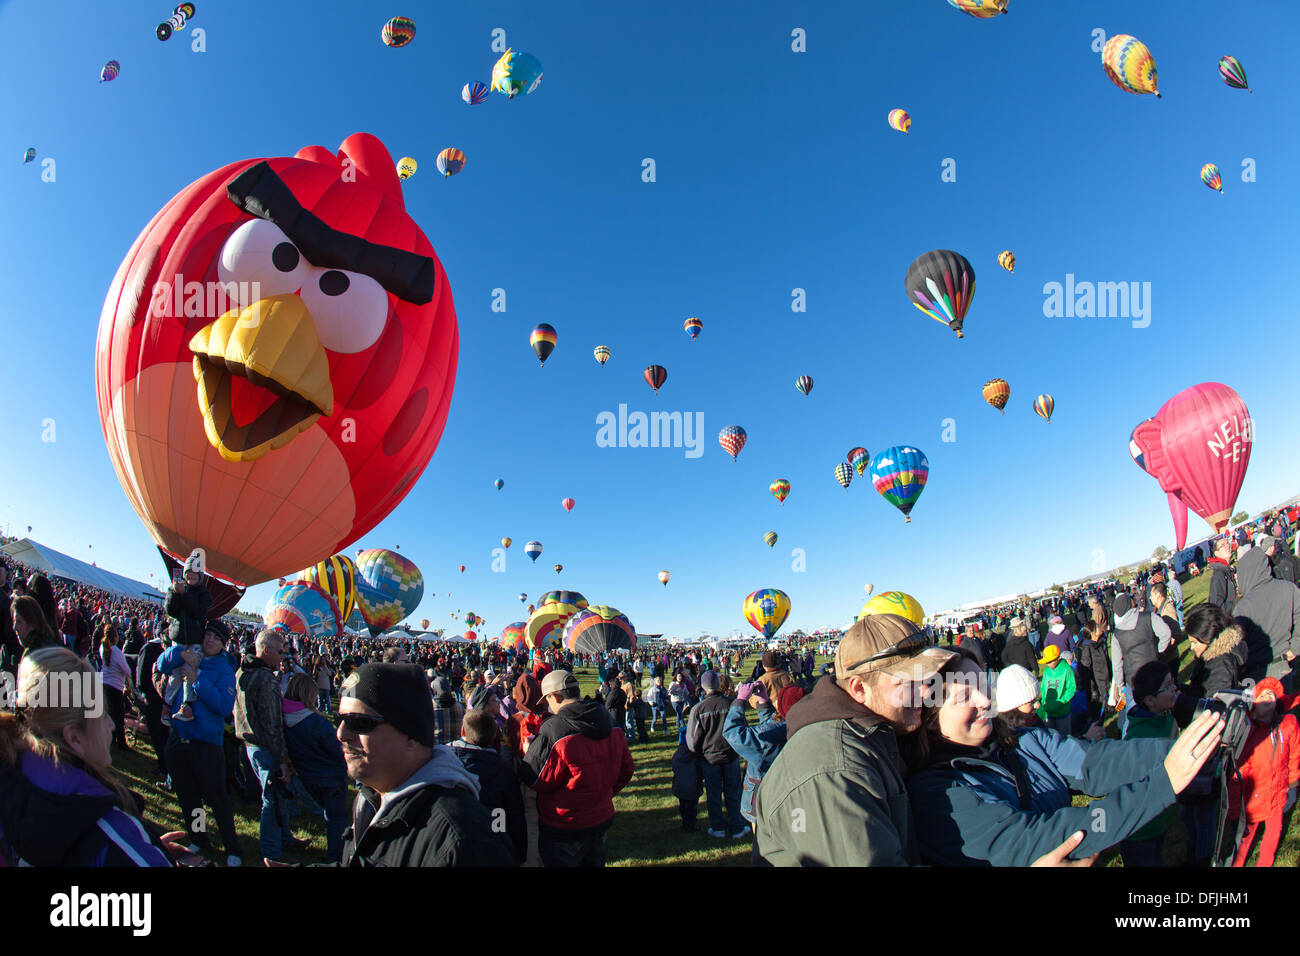 Albuquerque, NM, USA. 5th Oct, 2013. . The Angry Bird hot air balloon prepares for flight, First day of mass ascension at Albuquerque International Balloon Fiesta on Saturday October 5, 2013. Albuquerque, New Mexico, USA. Credit:  Christina Kennedy/Alamy Live News Stock Photo